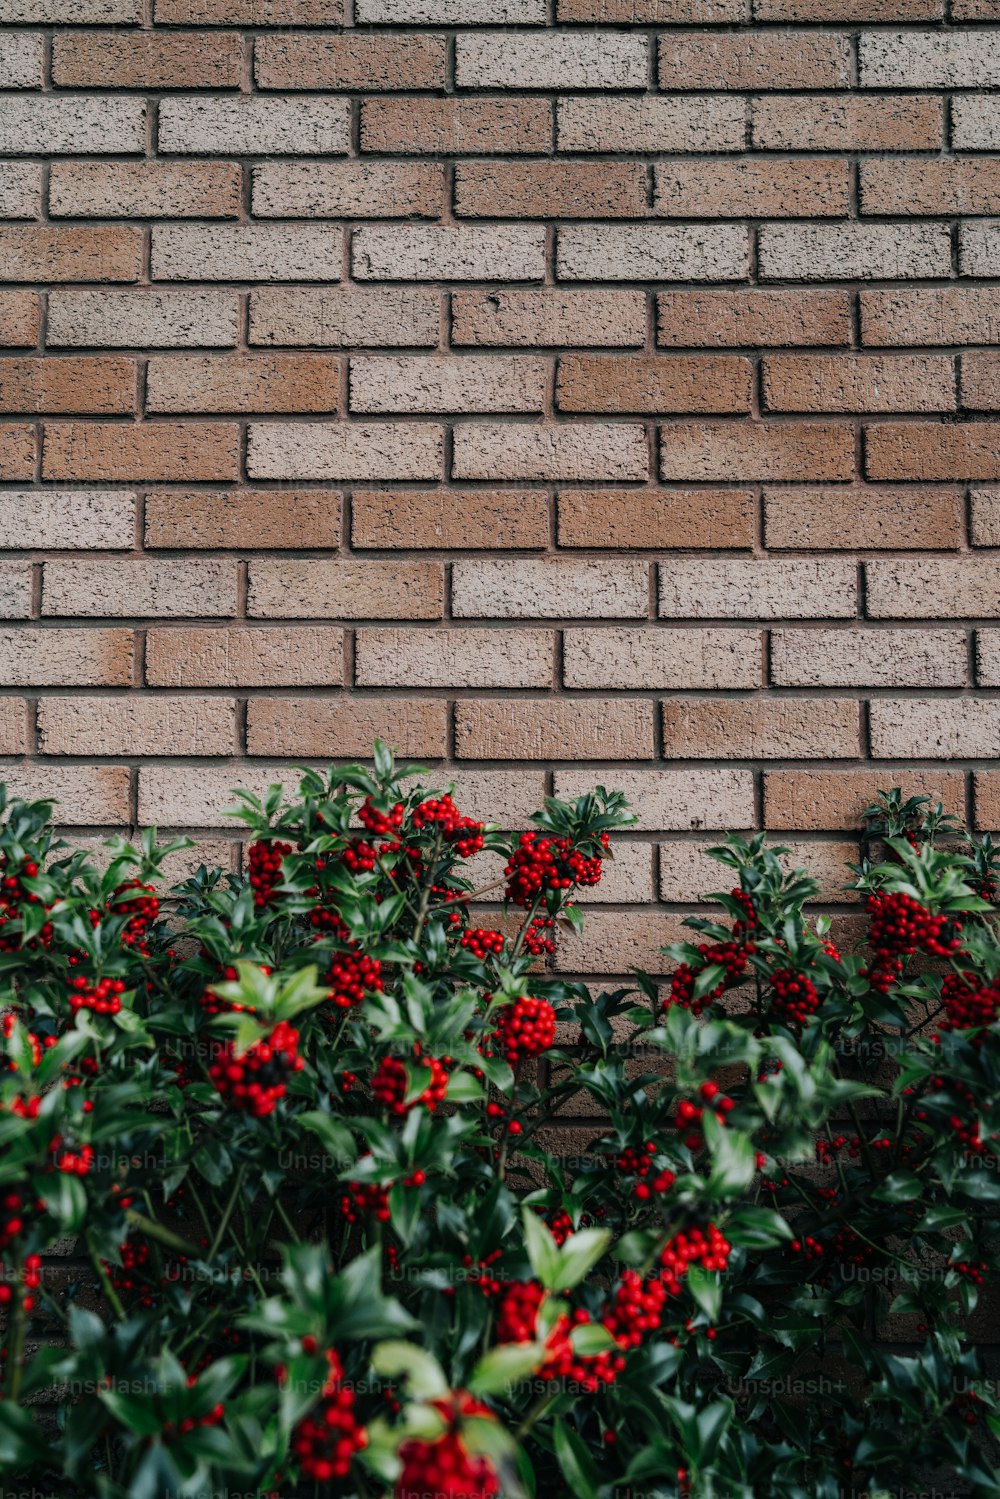 a brick wall with red berries growing on it